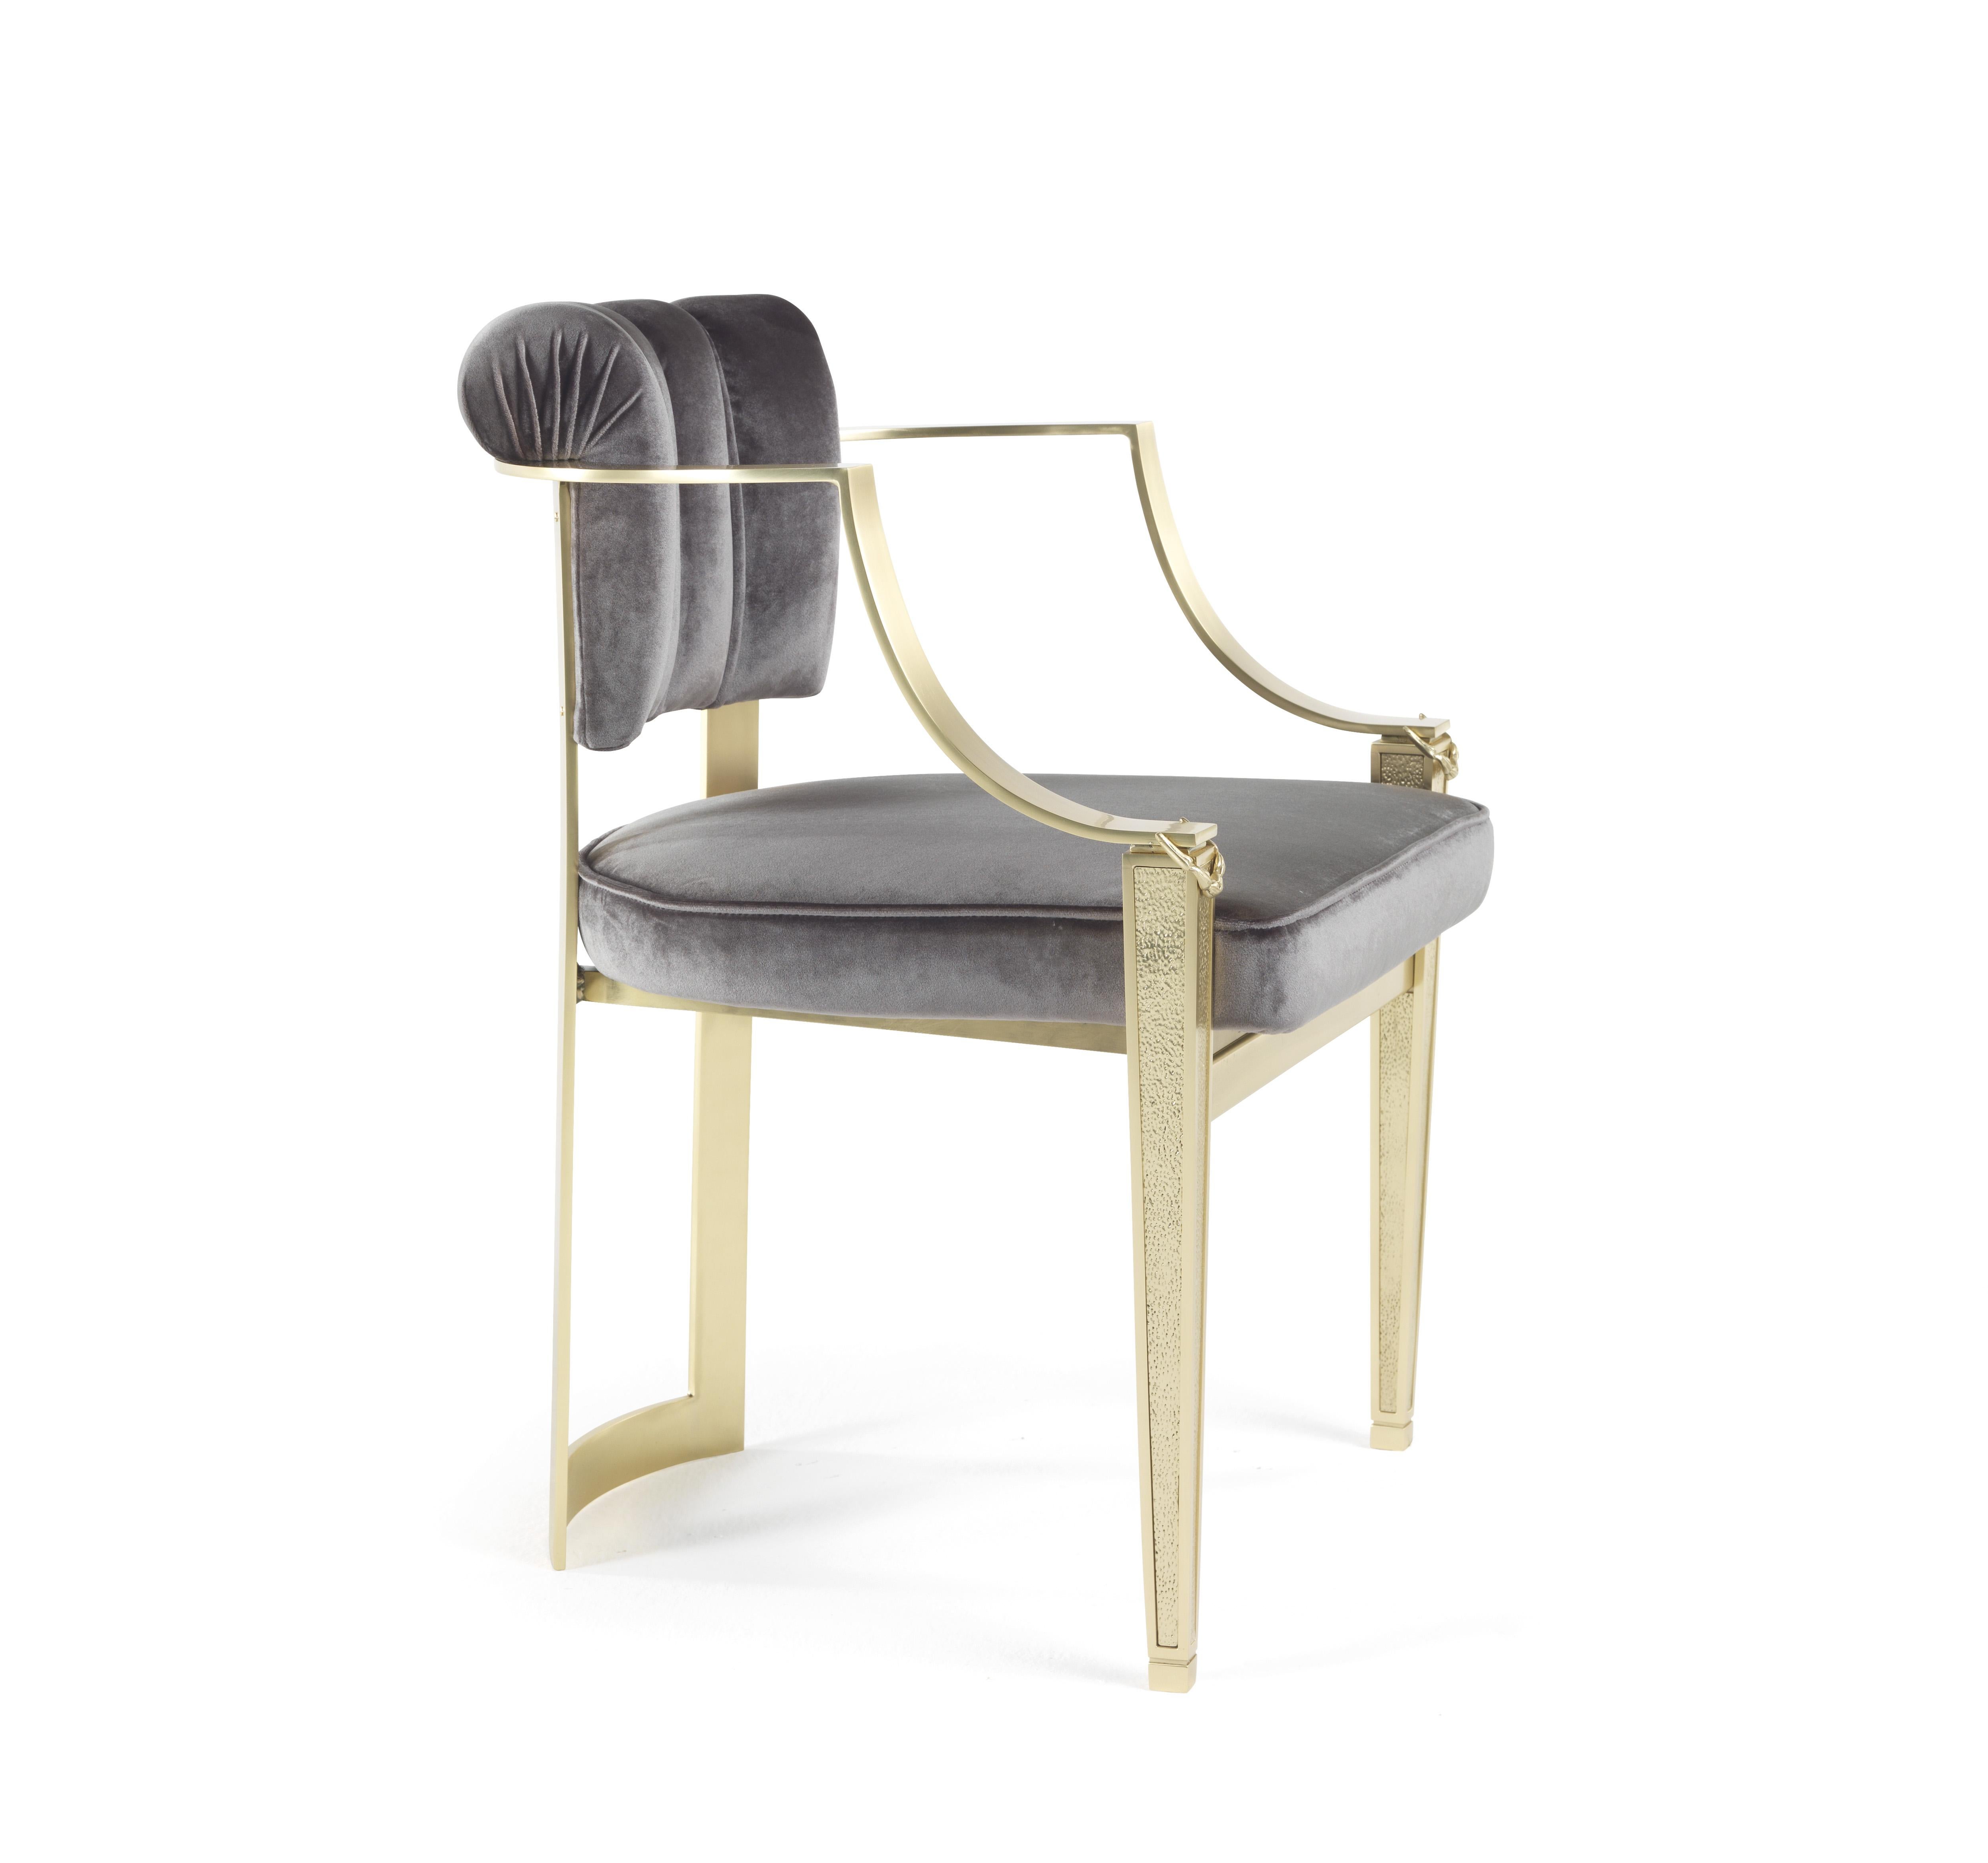 Italian 21st Century Fuji Chair in Brass and Fabric For Sale